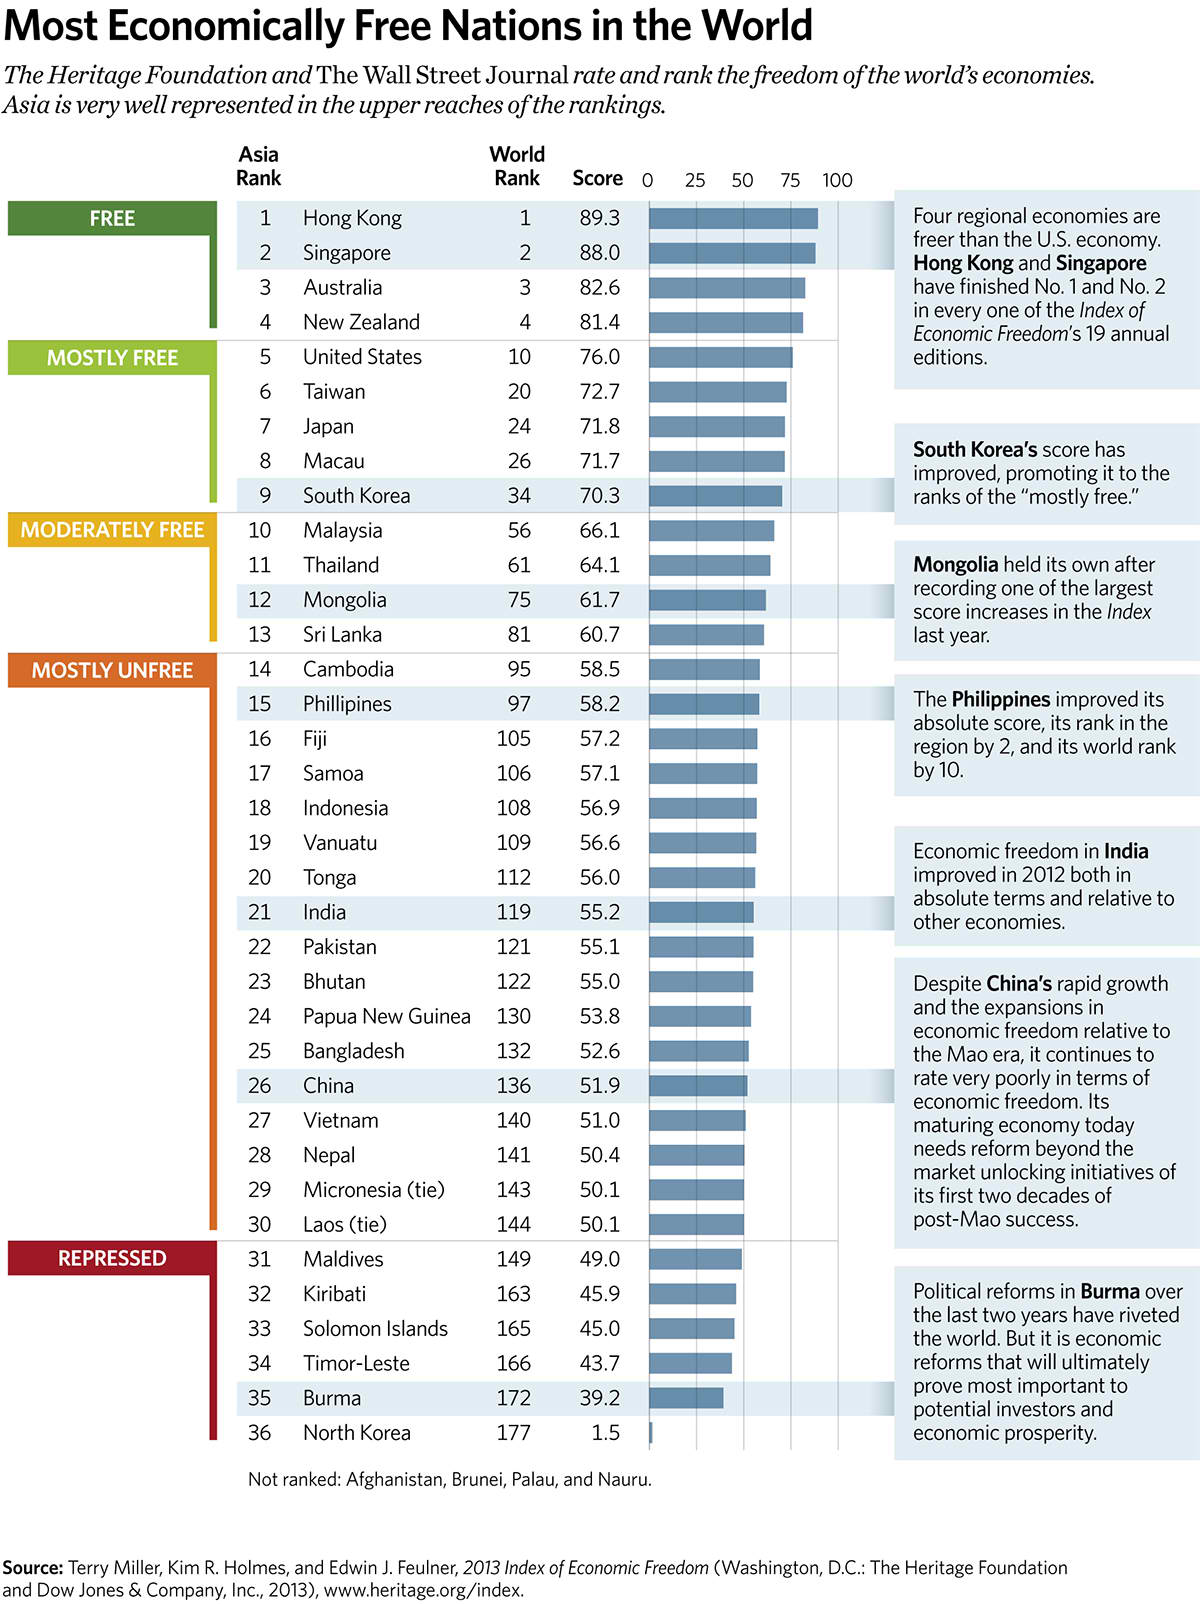 Most Economically Free Nations in the World